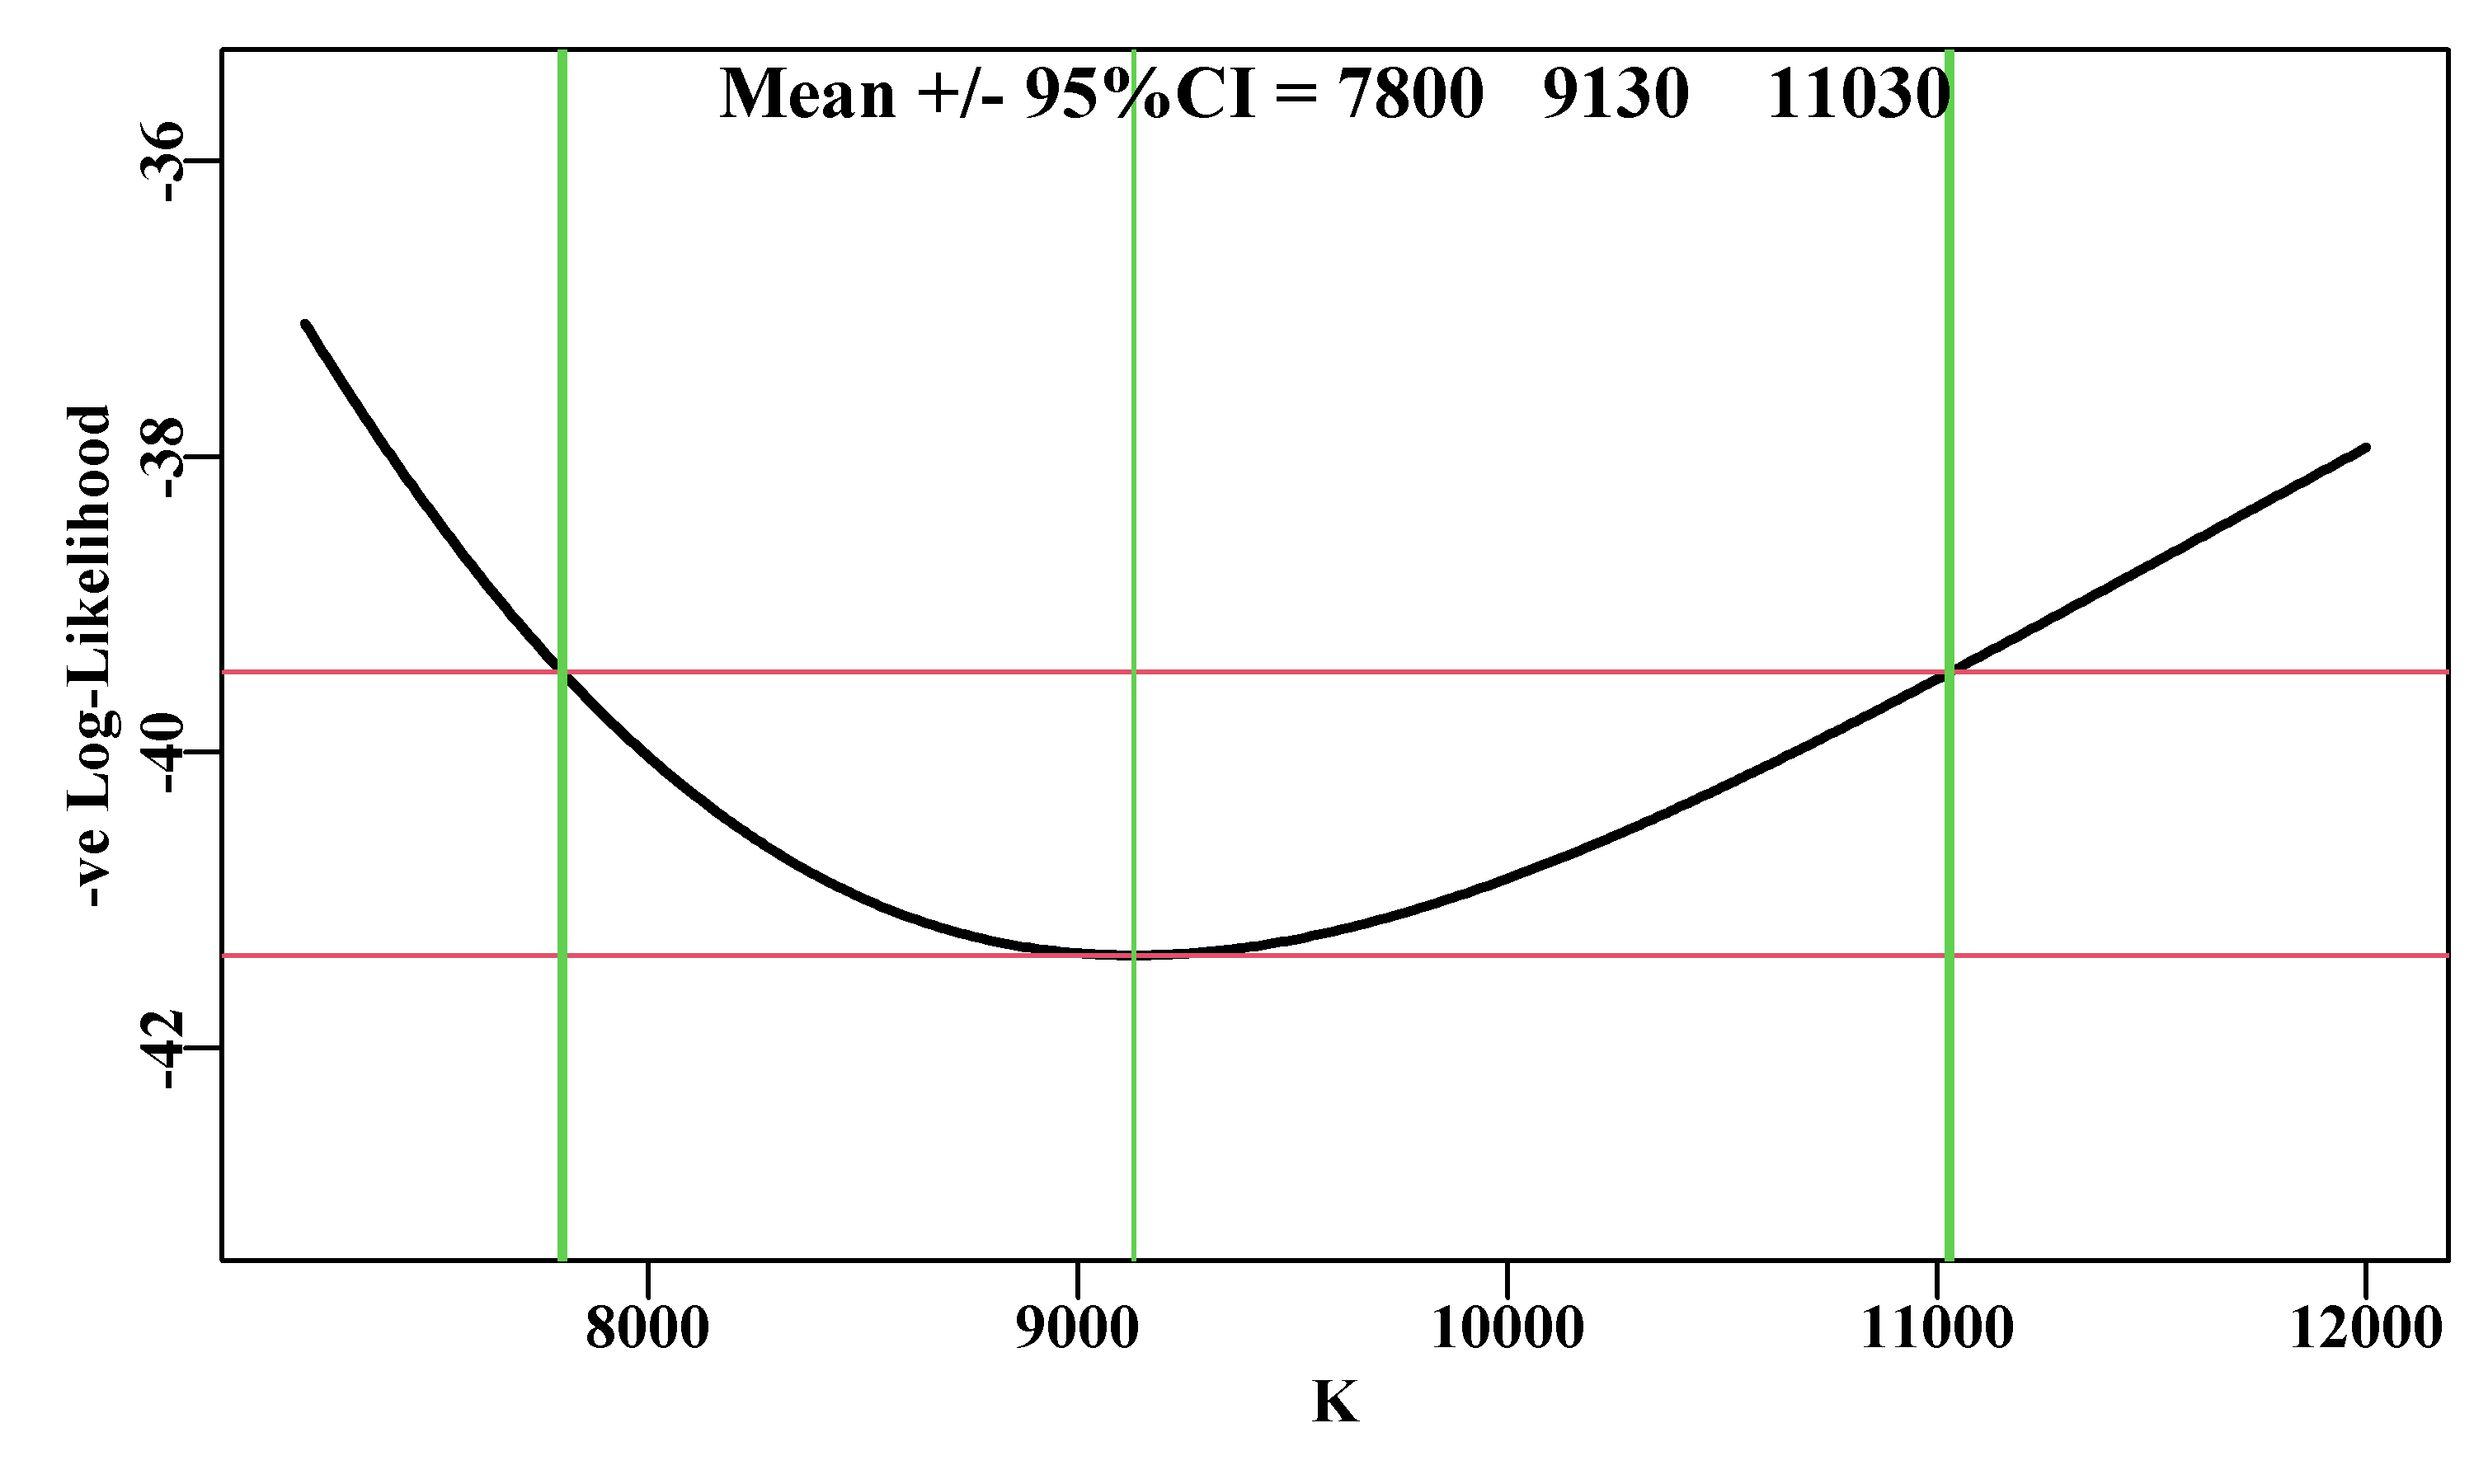 A likelihood profile for the K parameter from the Schaefer surplus production model fitted to the abdat data-set, conducted in the same manner as the r parameter. The red lines are the minimum and the minimum plus 1.92 (95% level for Chi2 with 1 degree of freedom, see text). The vertical thick lines are the approximate 95% confidence bounds around the mean of 9128.5.